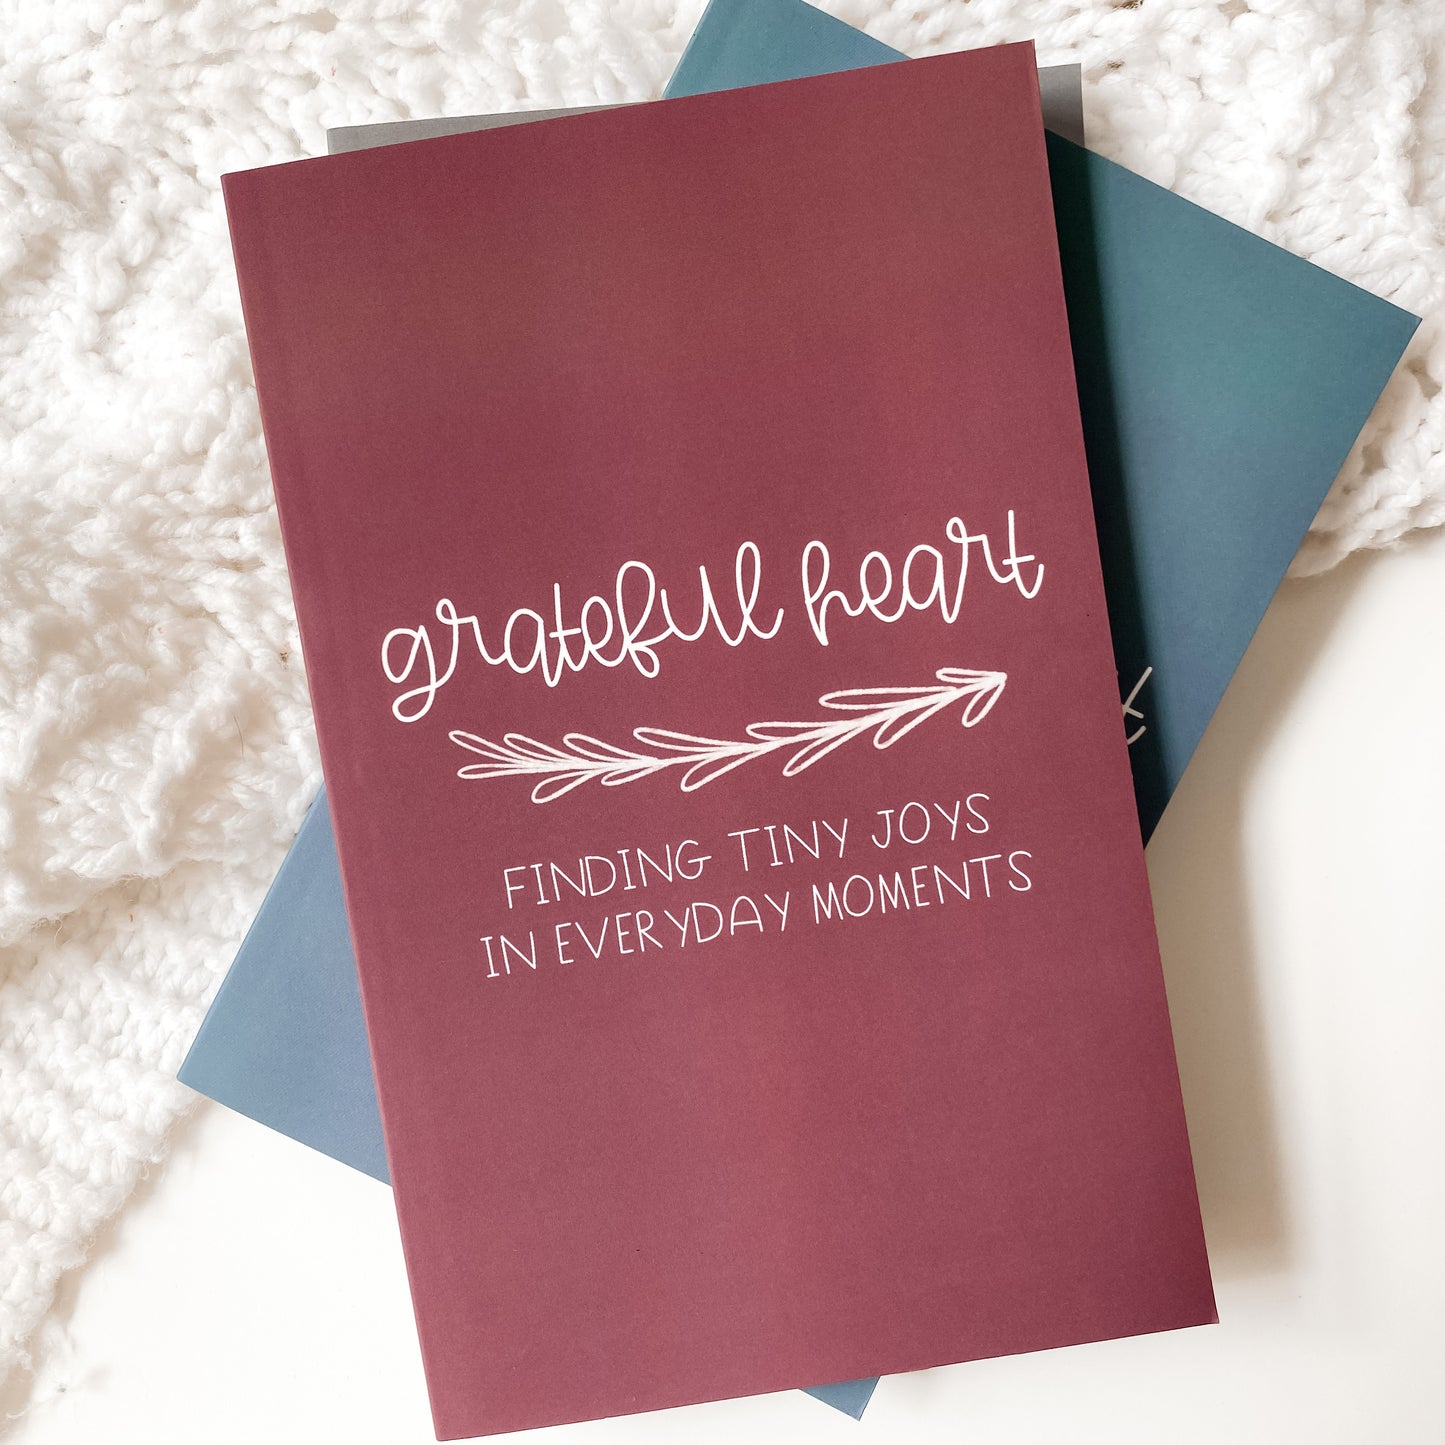 Maroon gratitude journal titled Grateful Heart Finding Tiny Joys in Everyday Moments